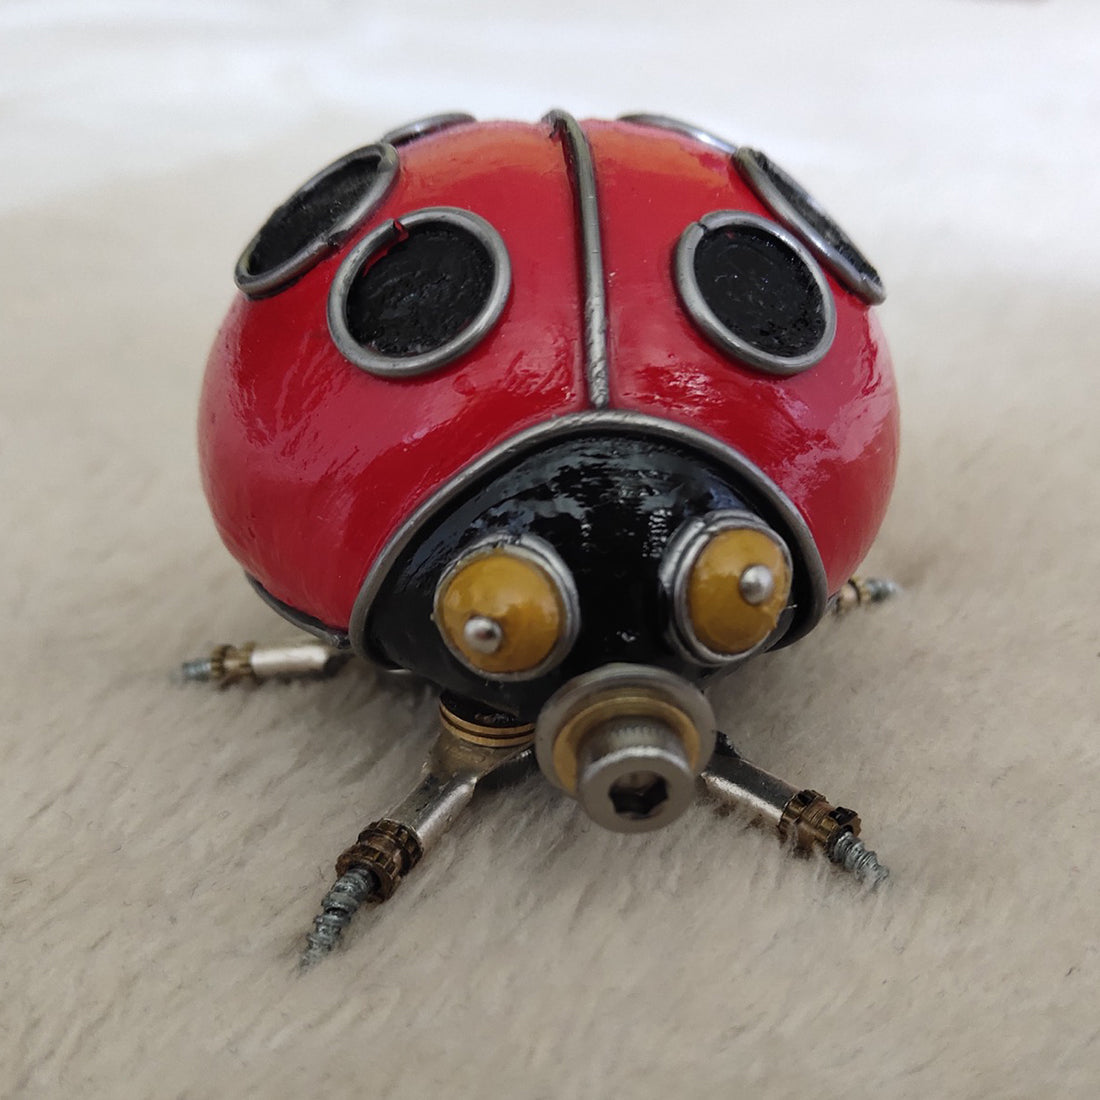 3D Metal Steampunk Coccinellidae Ladybird Sculpture Model for Collection